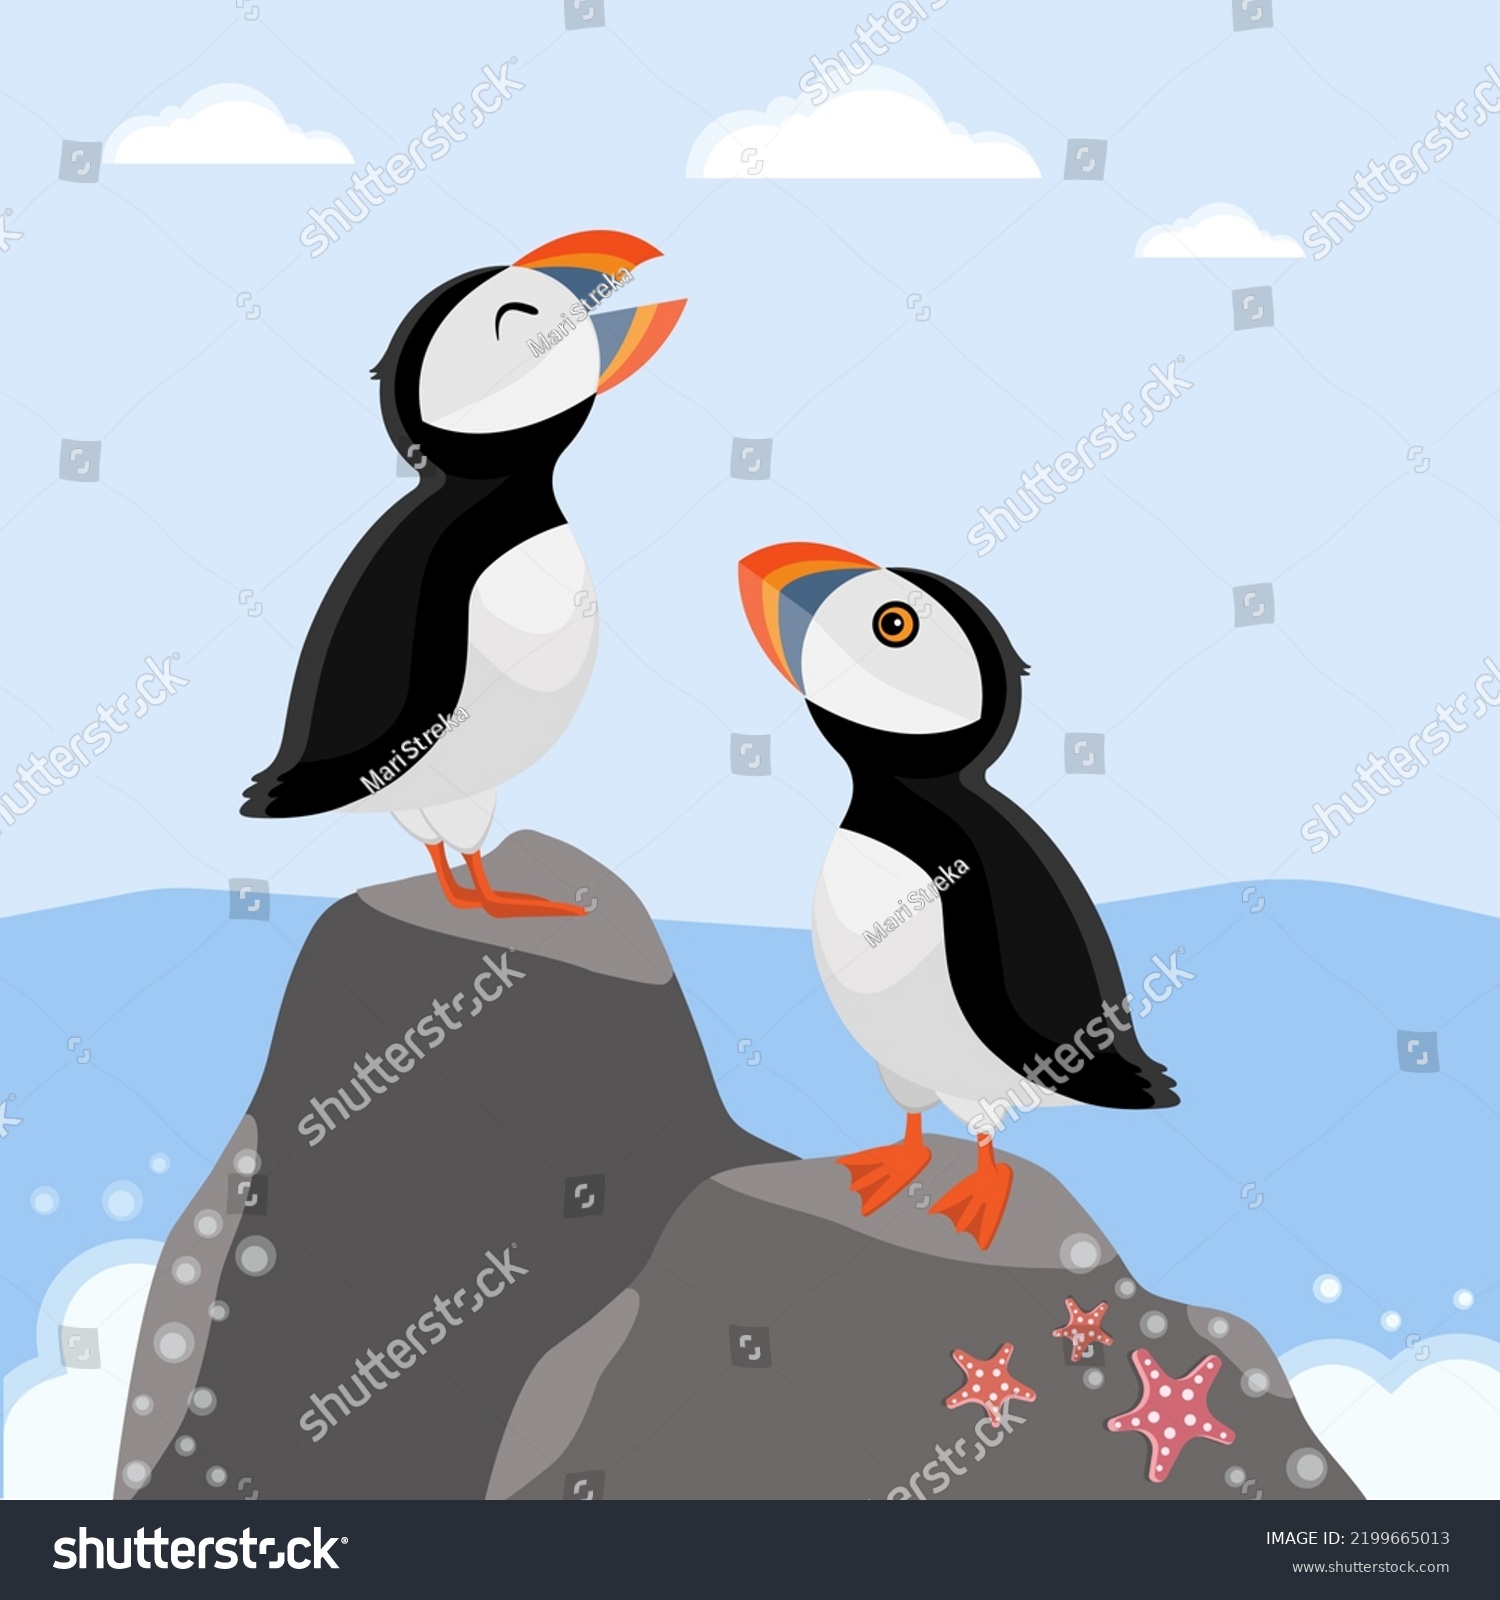 SVG of Colorful seascape with puffins in cartoon style. Puffin Colony vector illustration for designs, prints and patterns. svg